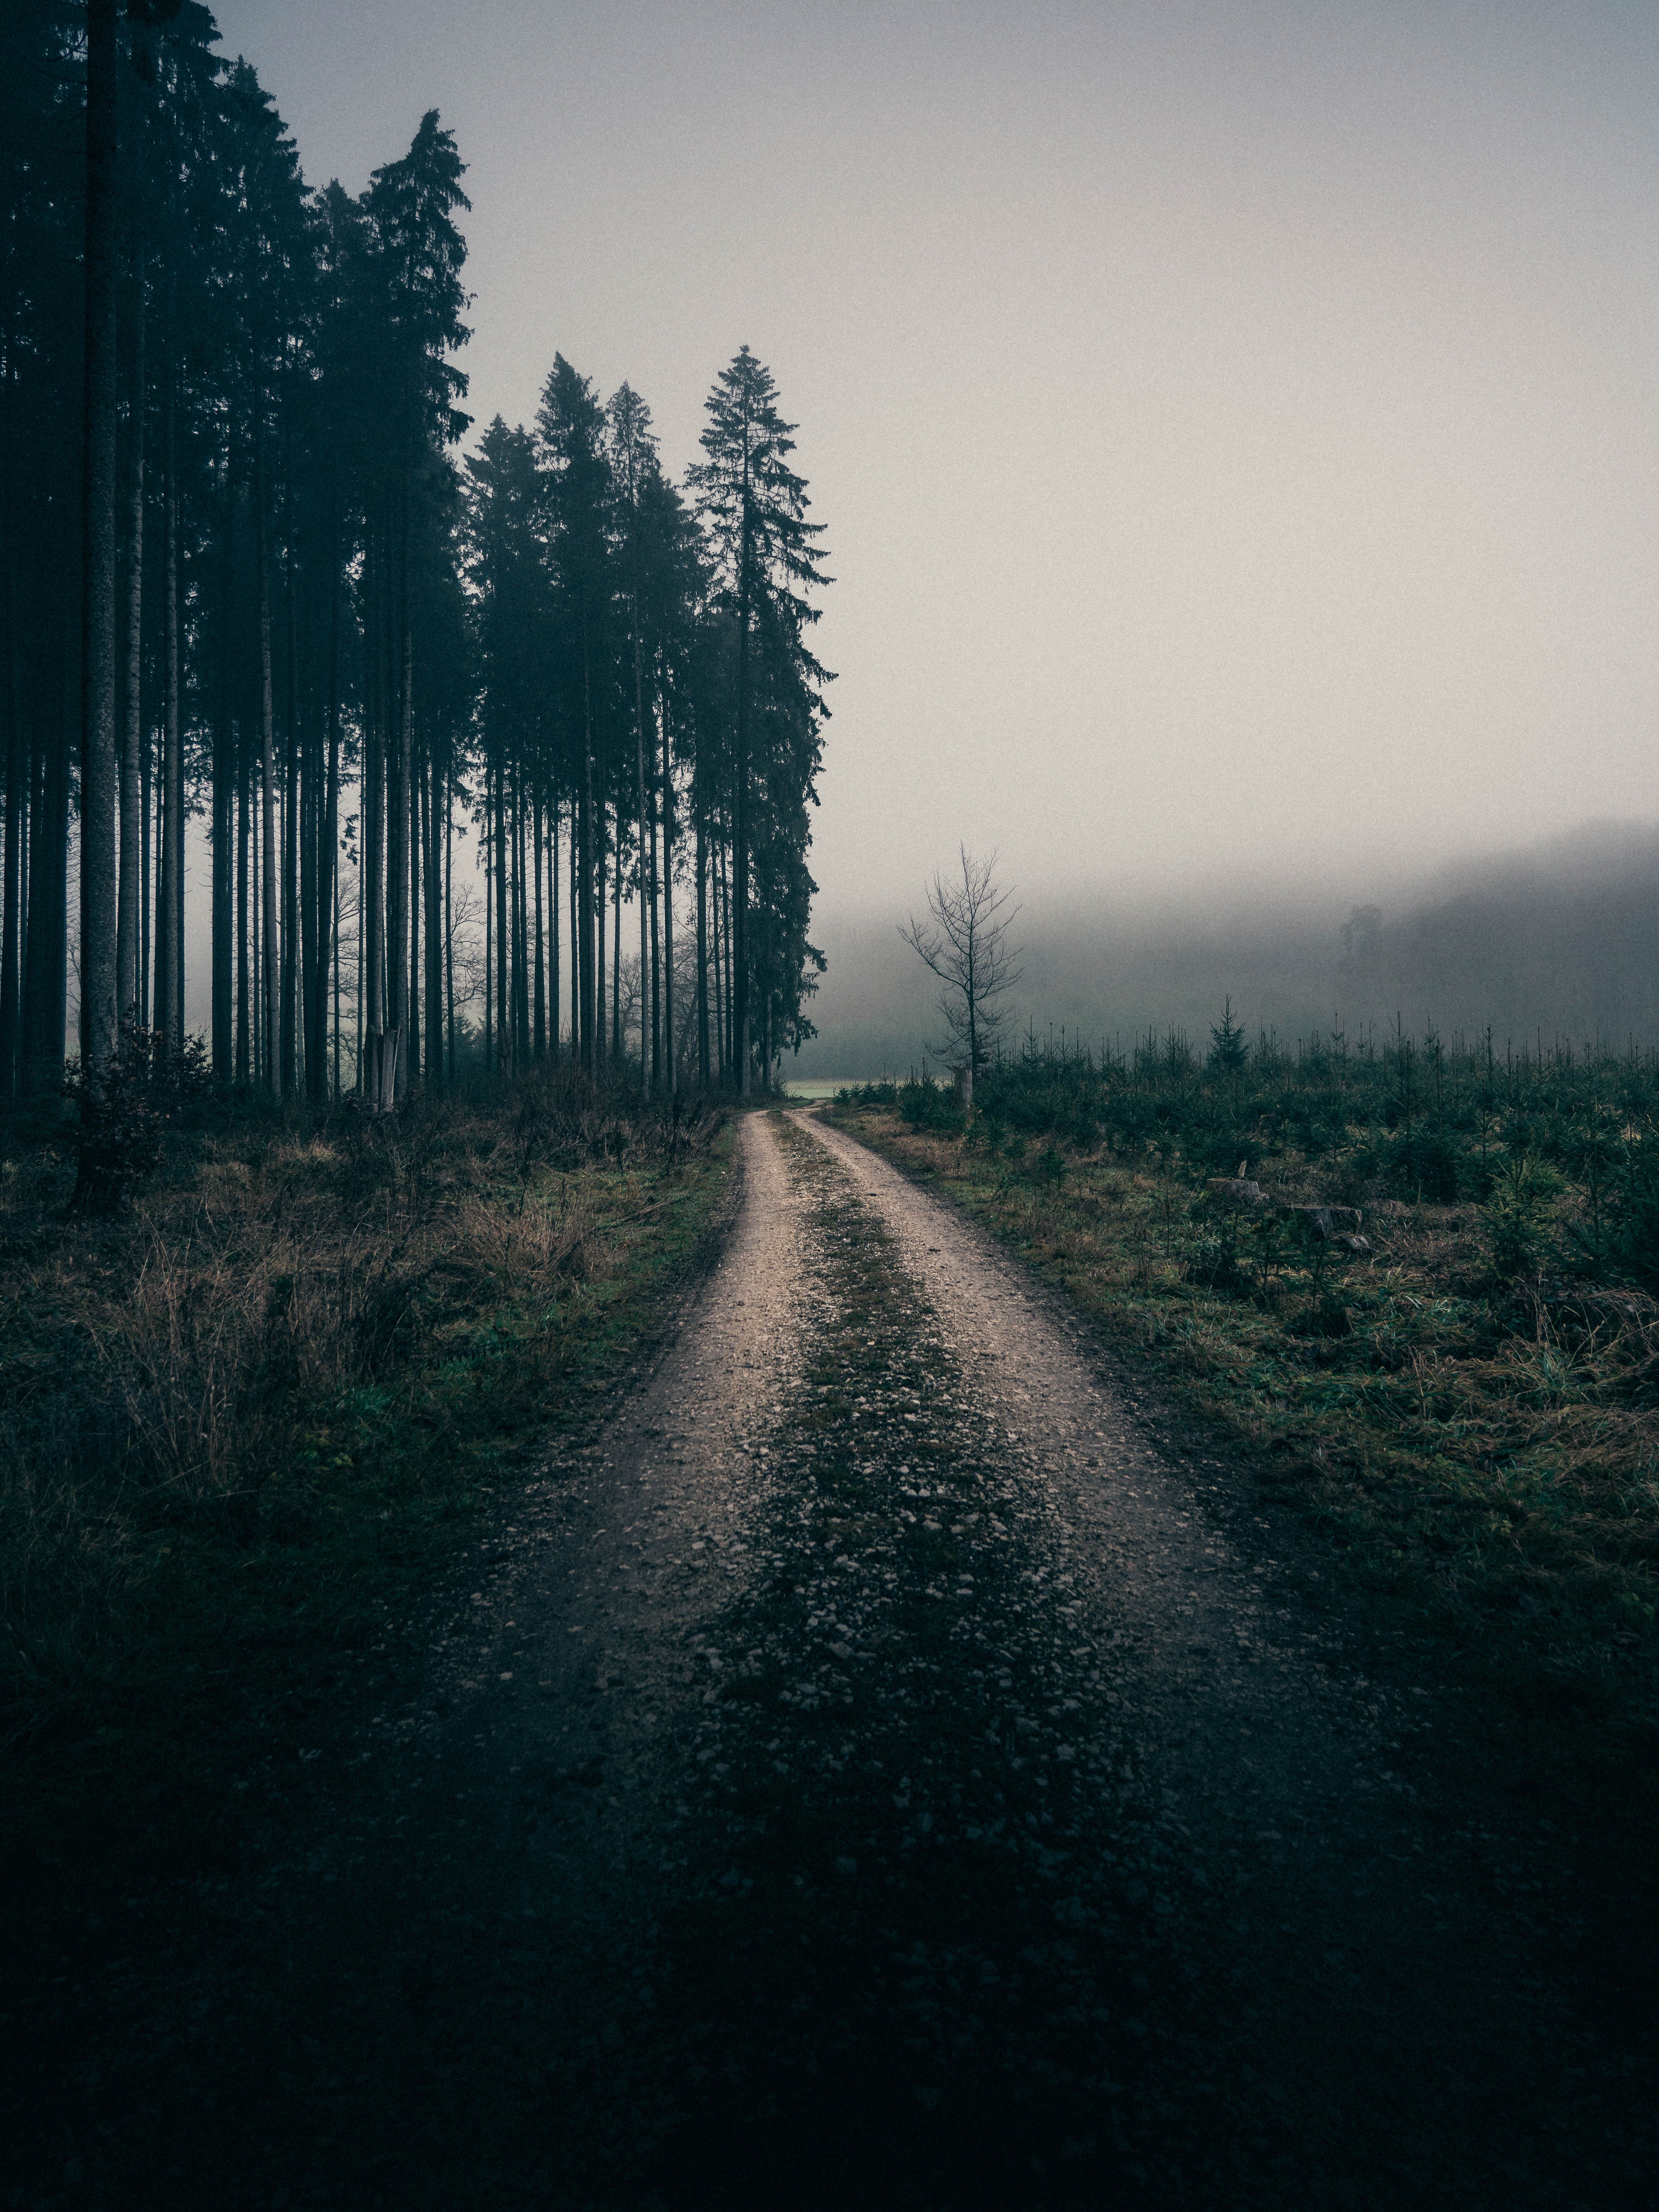 Mobile wallpaper: Fog, Trees, Road, Nature, Landscape, 56684 download the picture for free